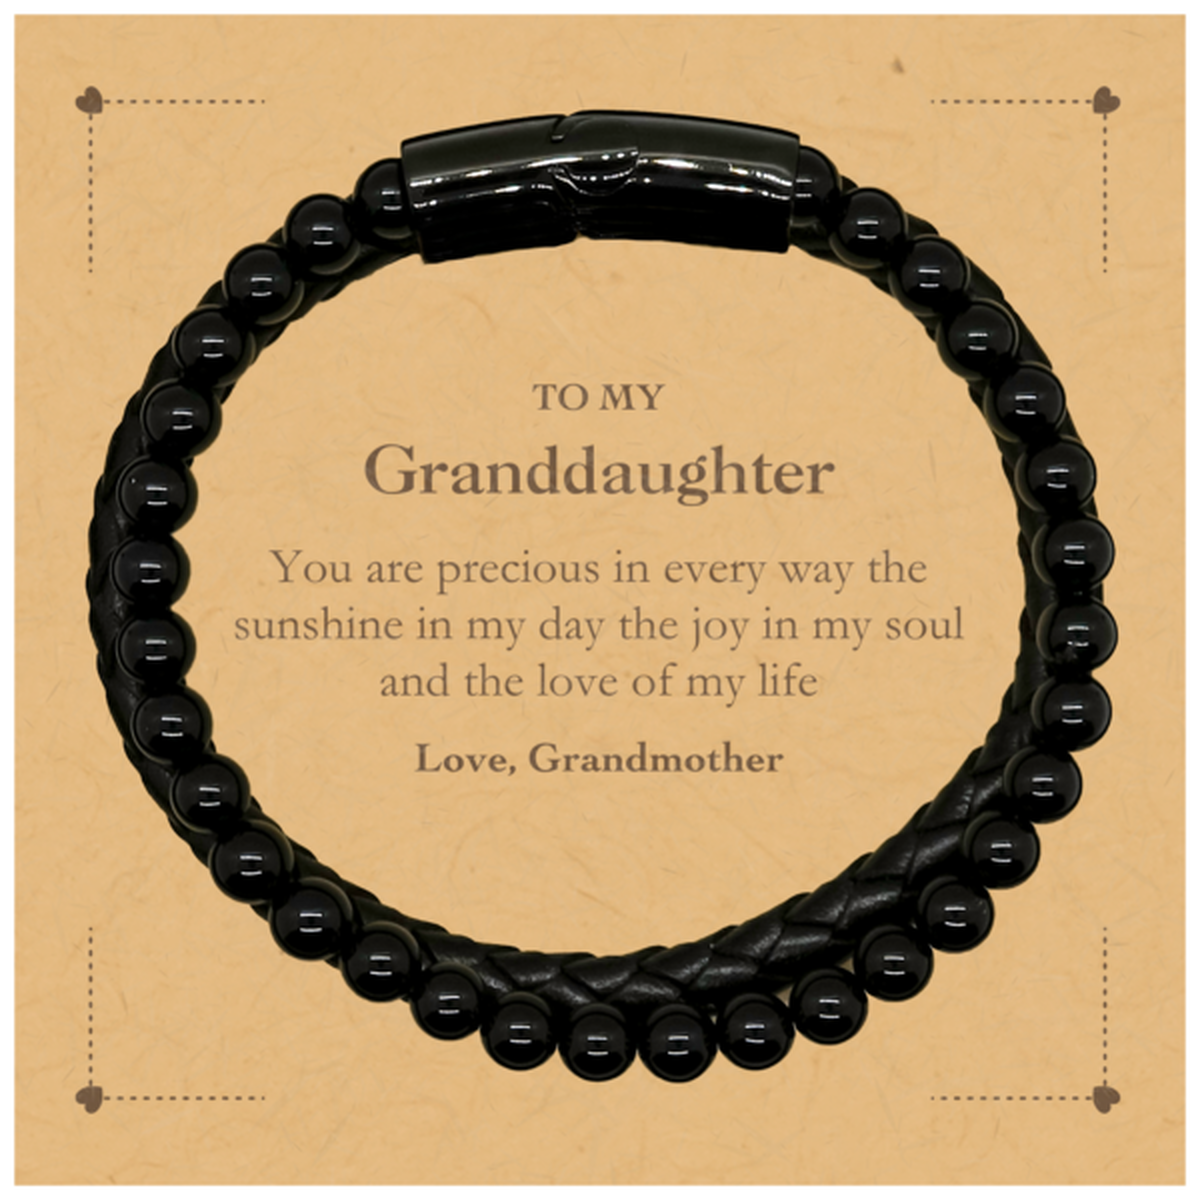 Graduation Gifts for Granddaughter Stone Leather Bracelets Present from Grandmother, Christmas Granddaughter Birthday Gifts Granddaughter You are precious in every way the sunshine in my day. Love, Grandmother